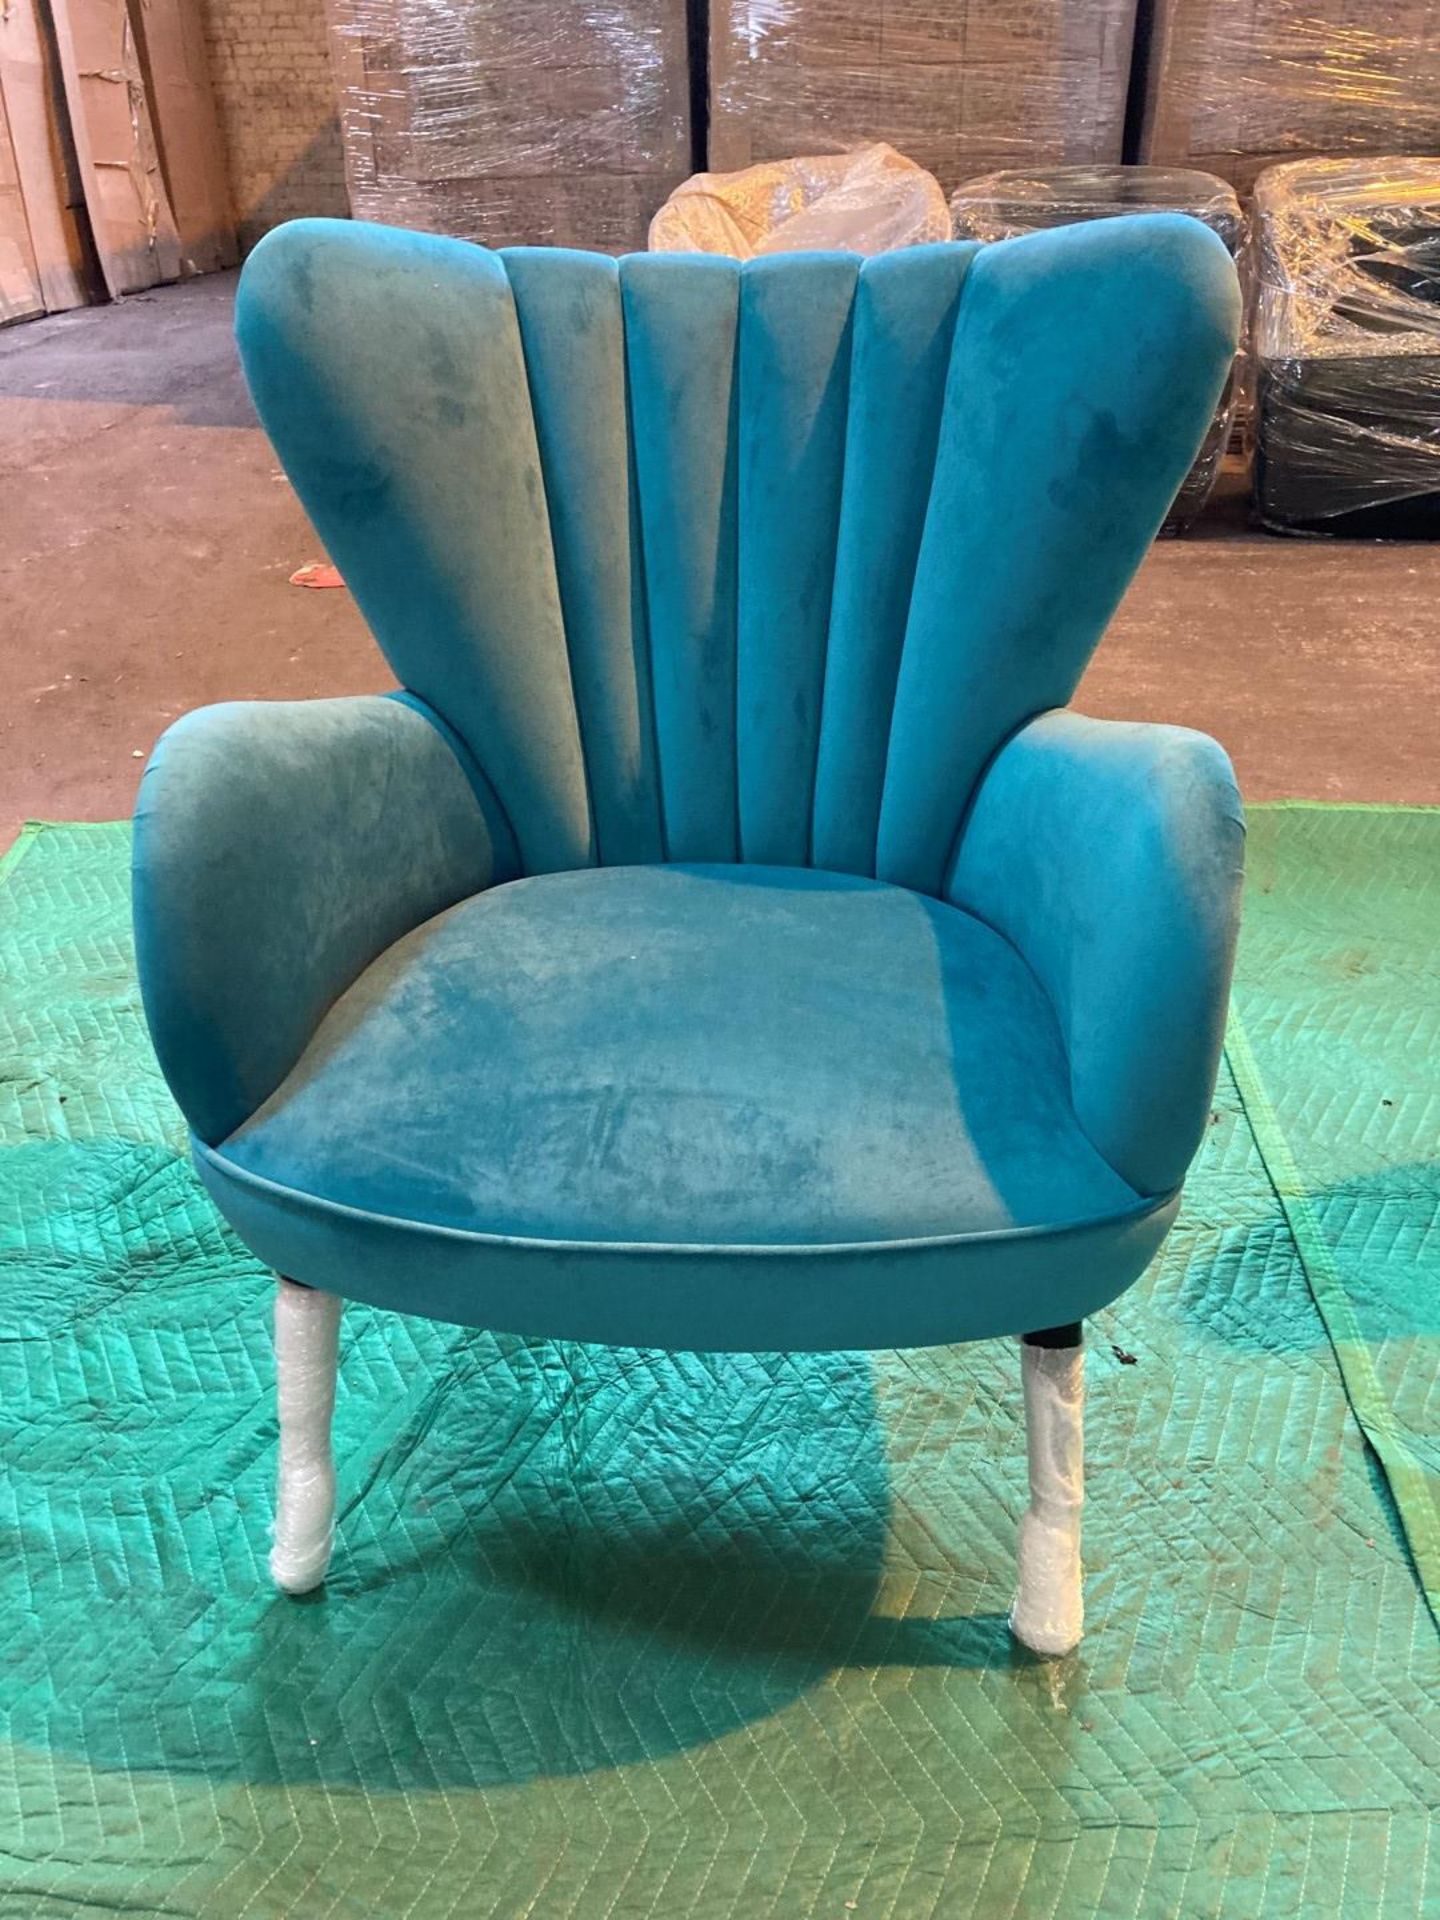 Teal 'Buenos Aires' armchair - Image 2 of 3